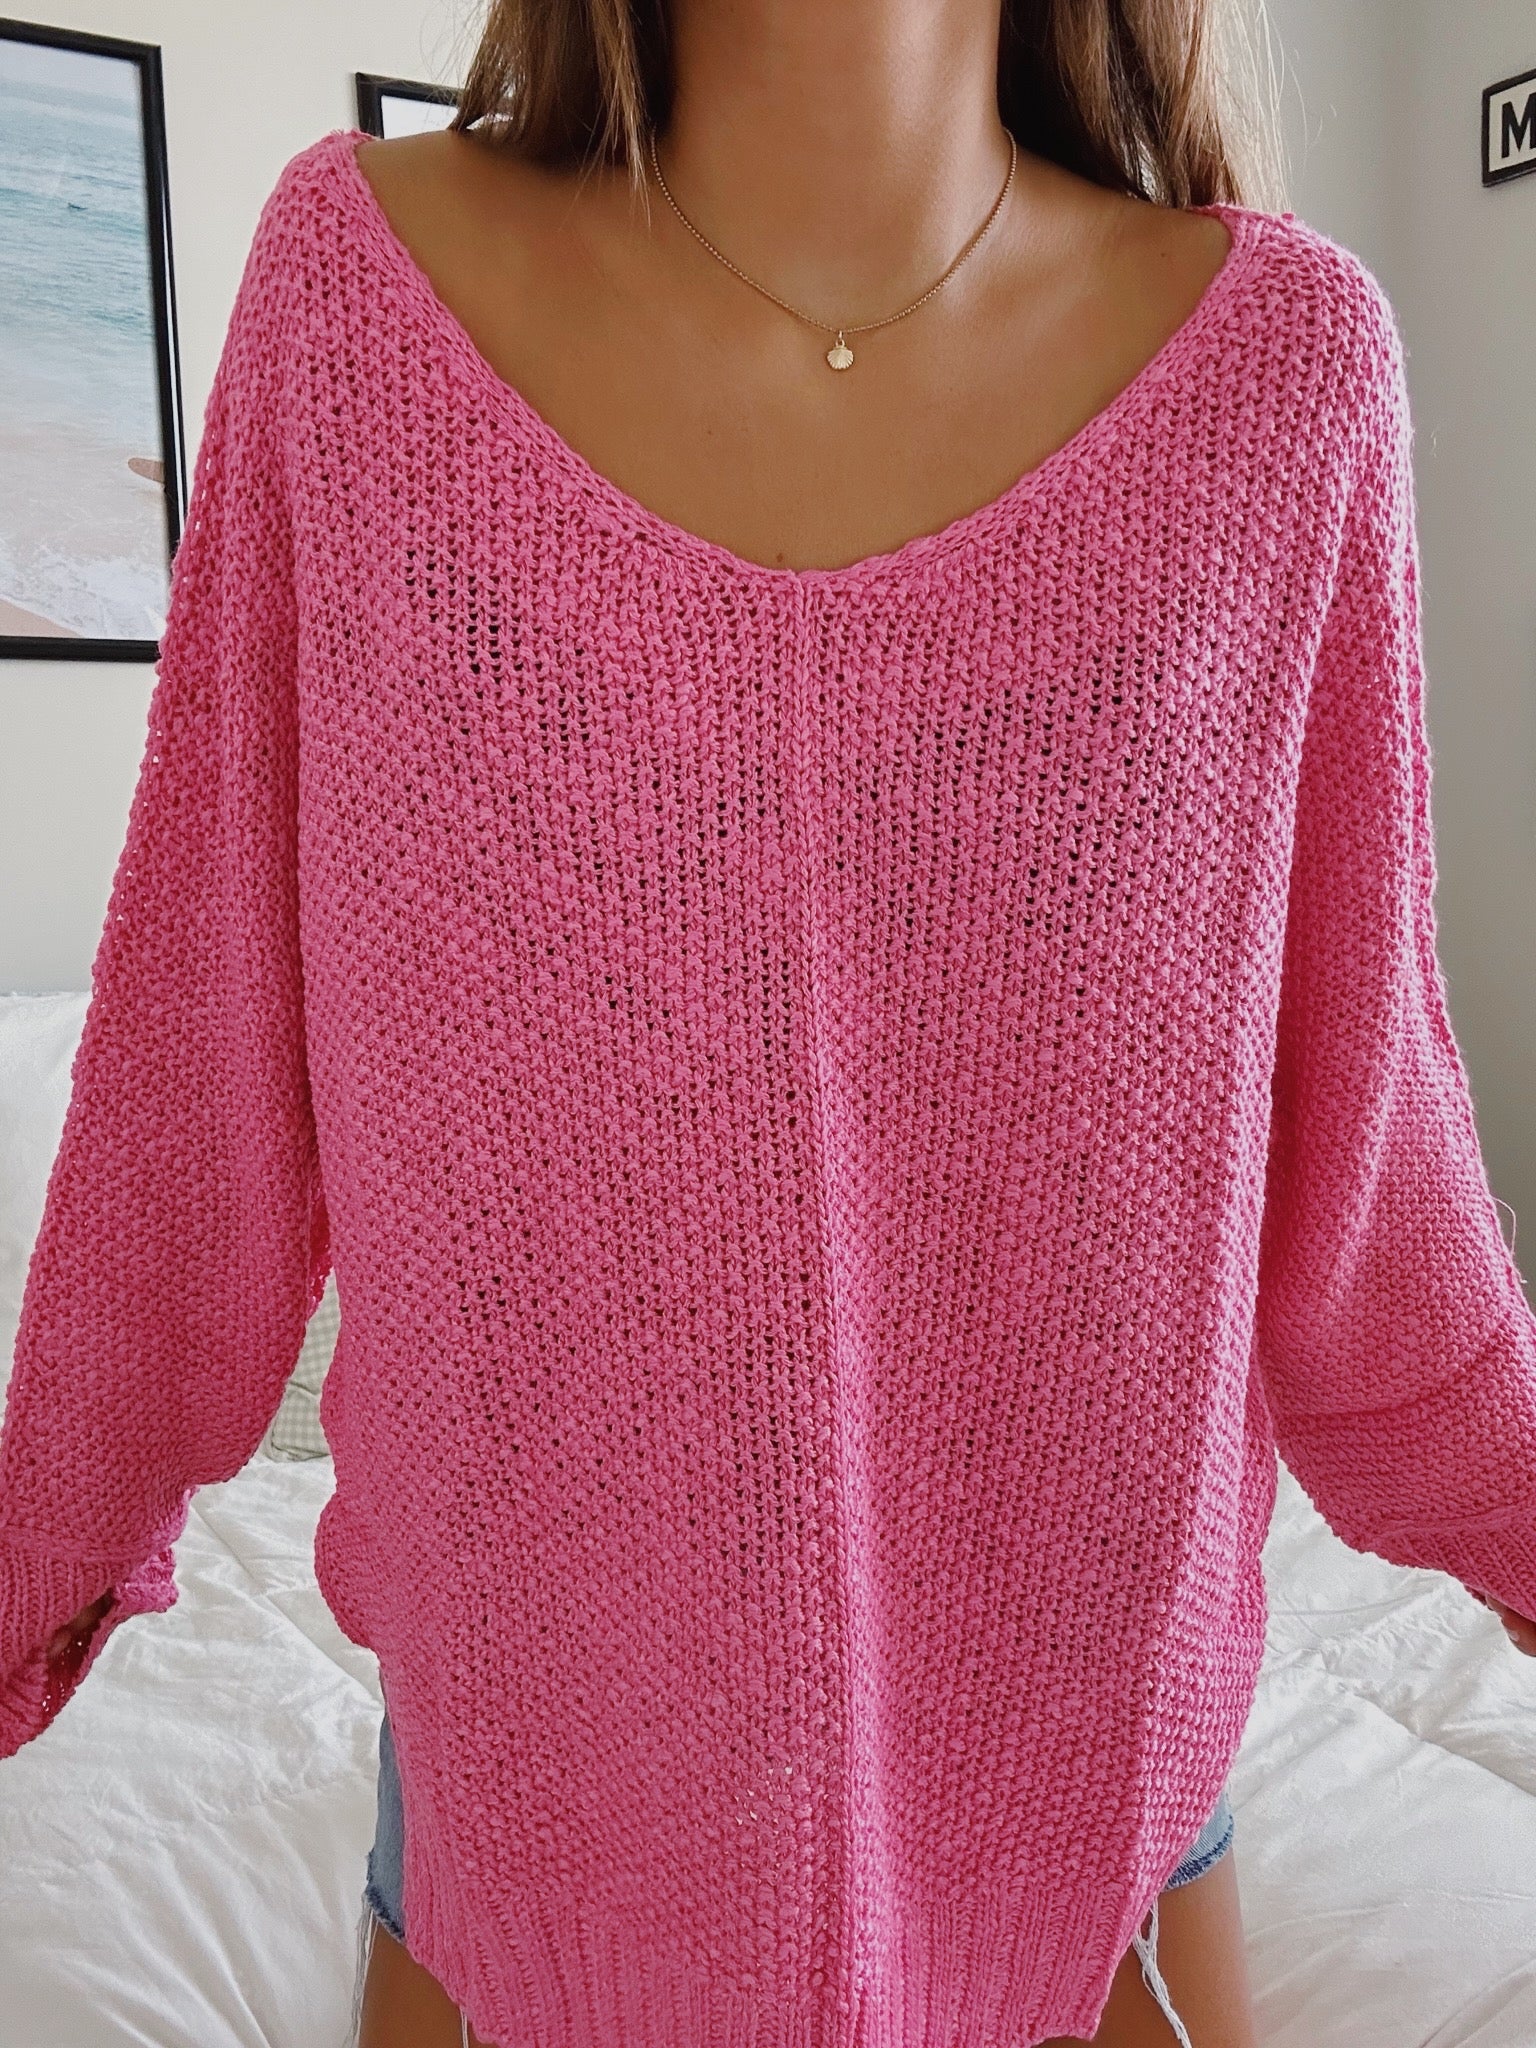 BRIGHTER DAYS KNIT SWEATER